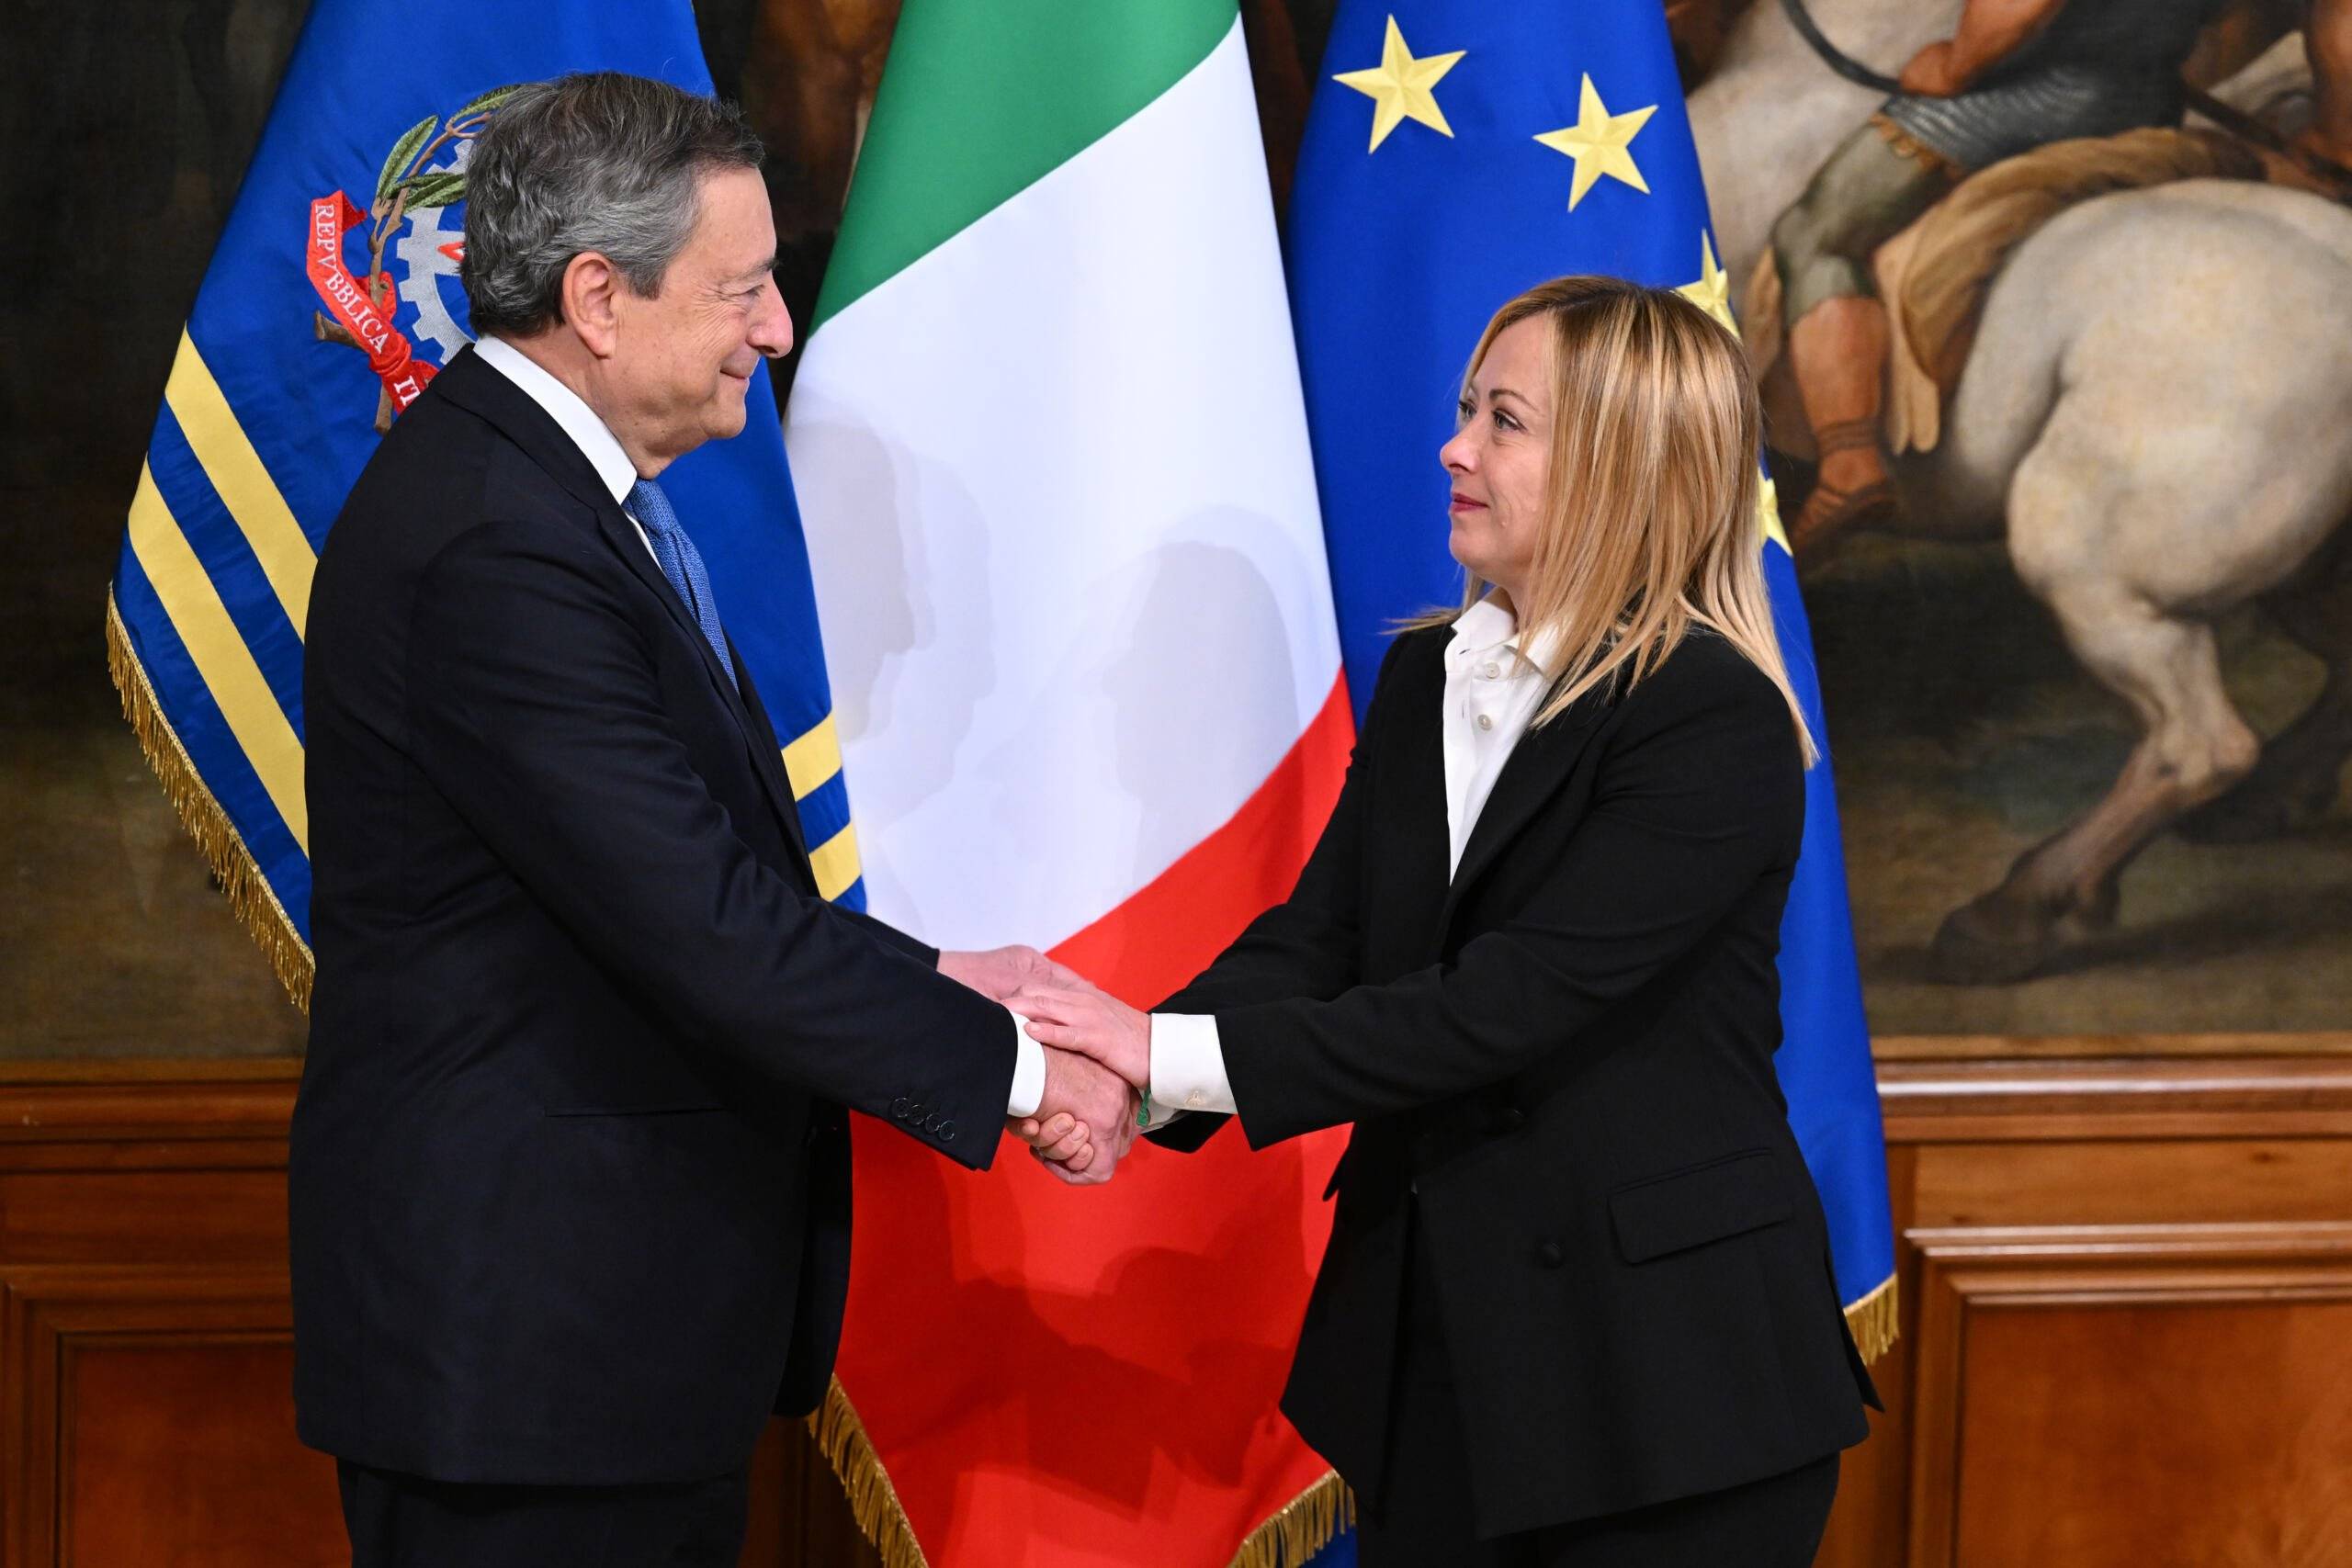 Italy's outgoing prime minister, Mario Draghi and Italy's new prime minister, Giorgia Meloni shake hands during the cabinet minister bell handover ceremony at Palazzo Chigi in Rome on October 23, 2022. - Far-right leader Giorgia Meloni was named Italian prime minister on October 21, 2022 after her party's historic election win, becoming the first woman to head a government in Italy. (Photo by Andreas SOLARO / AFP)